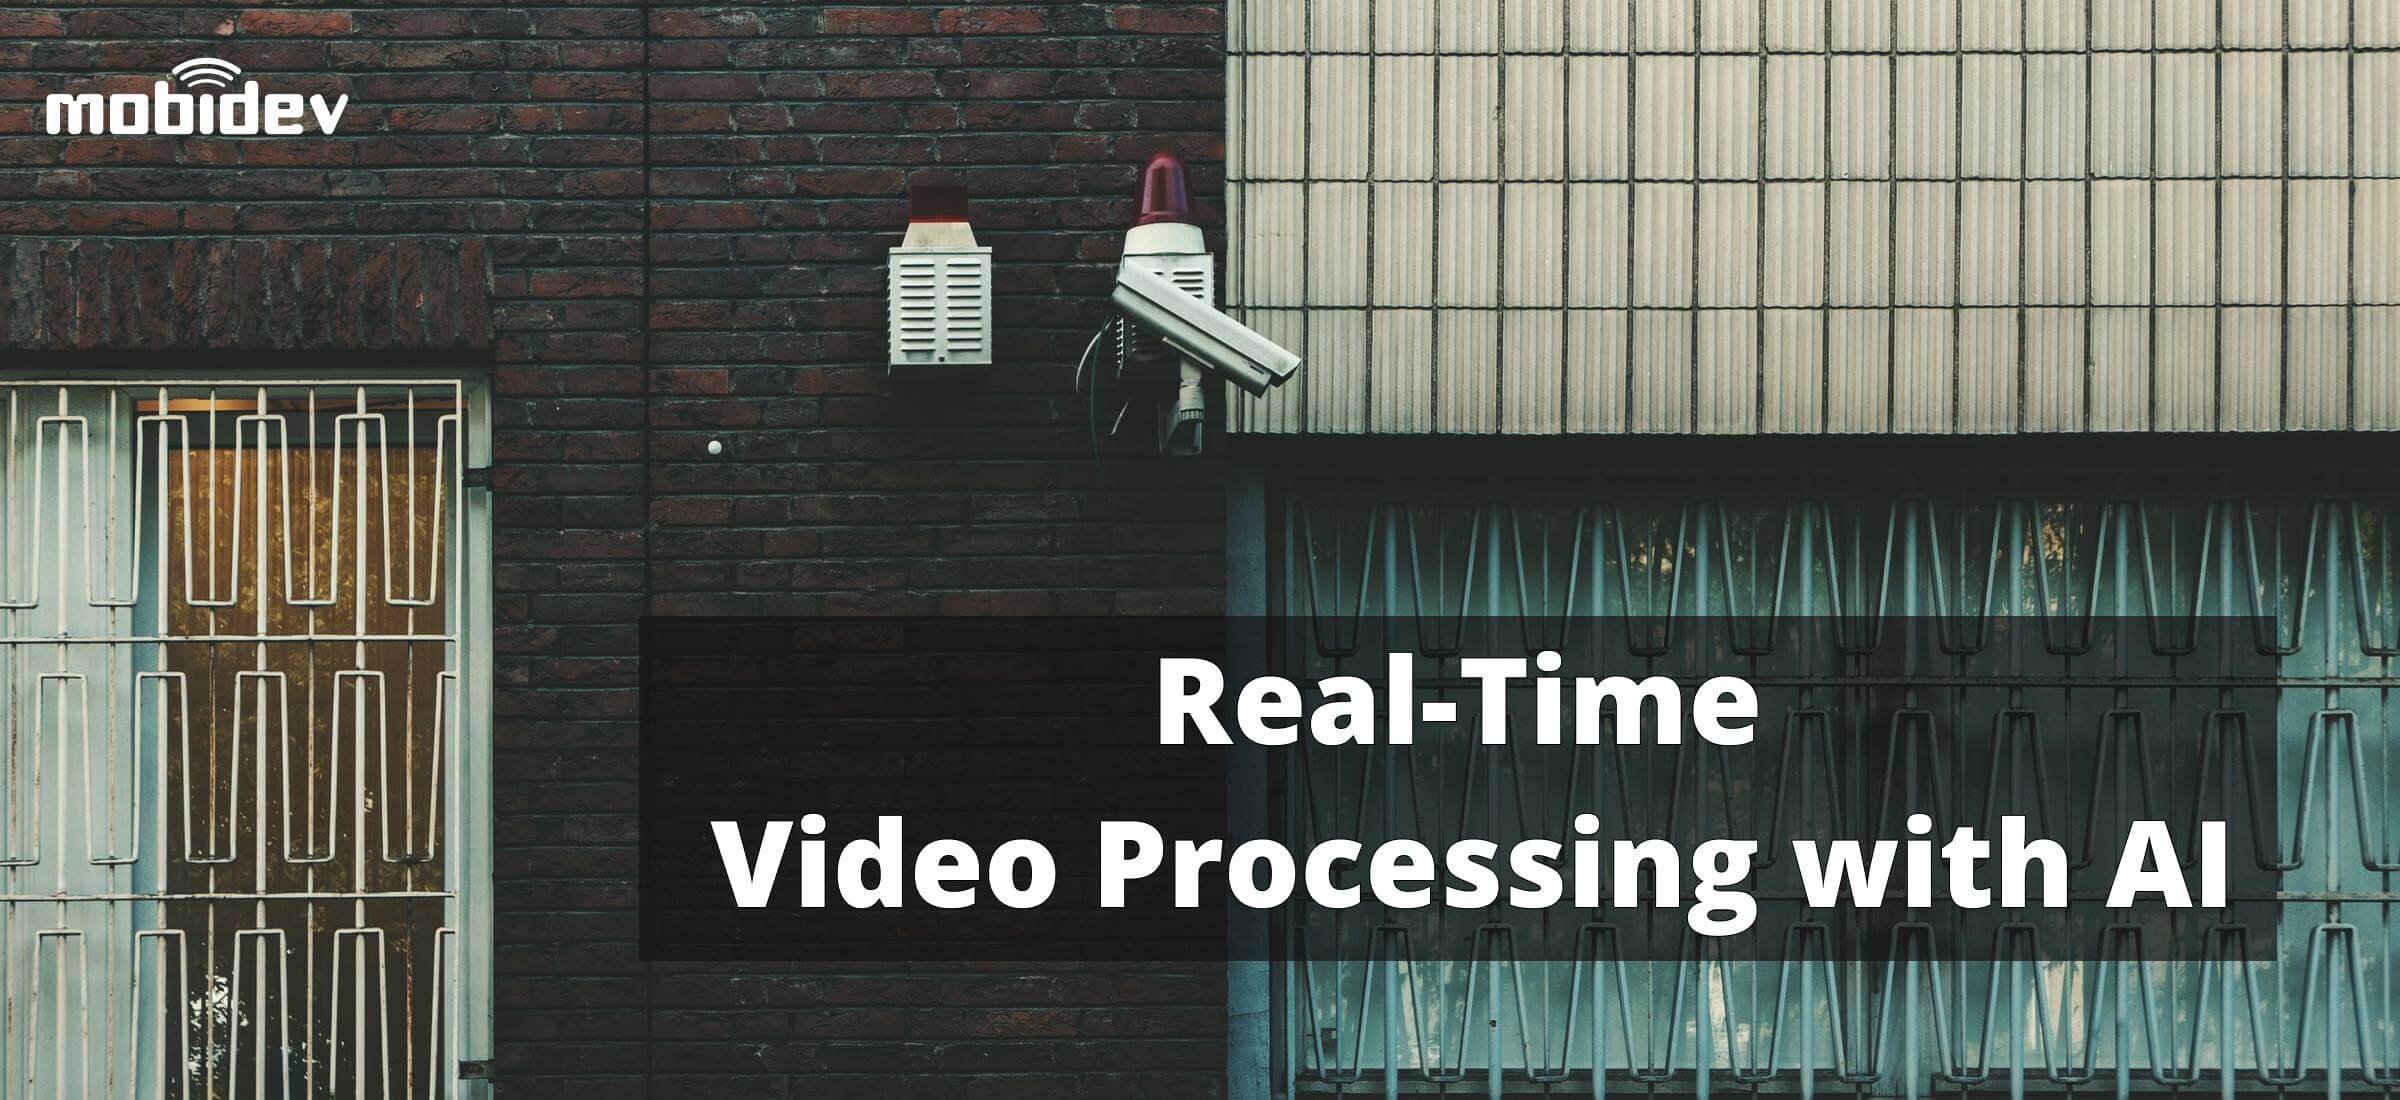 Real-time Video Processing with AI